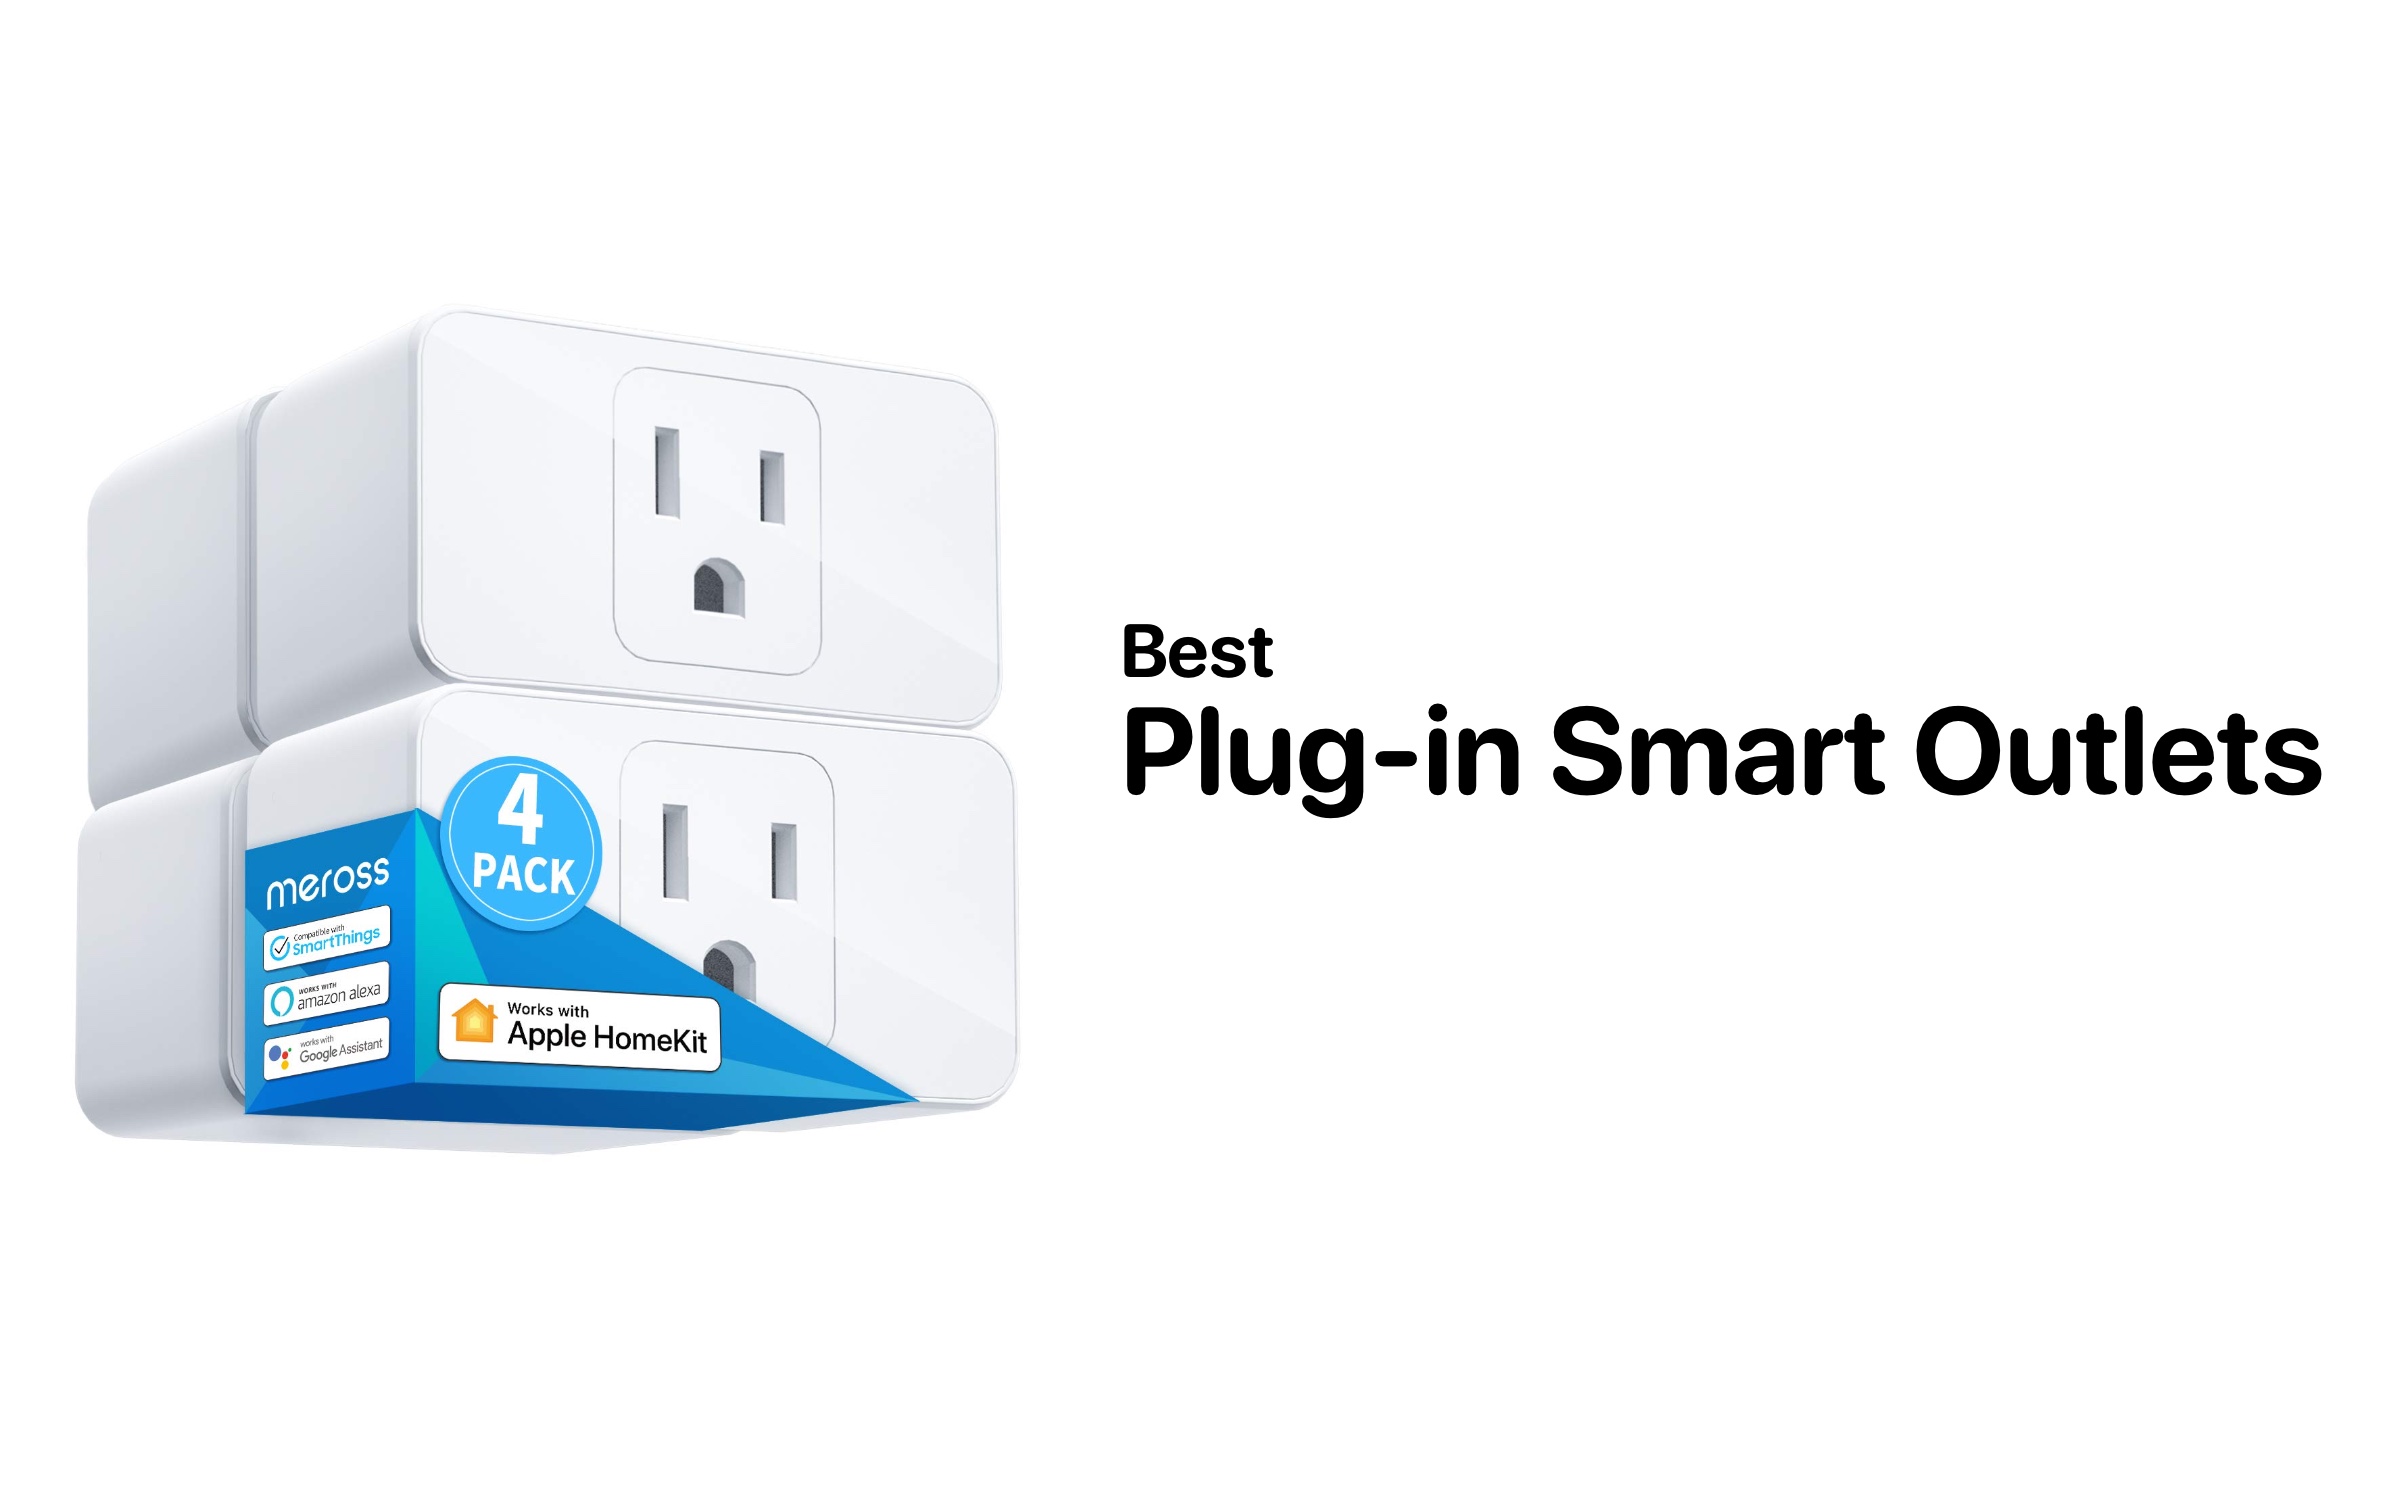 Best smart plugs for Google Assistant and Google Home in 2023